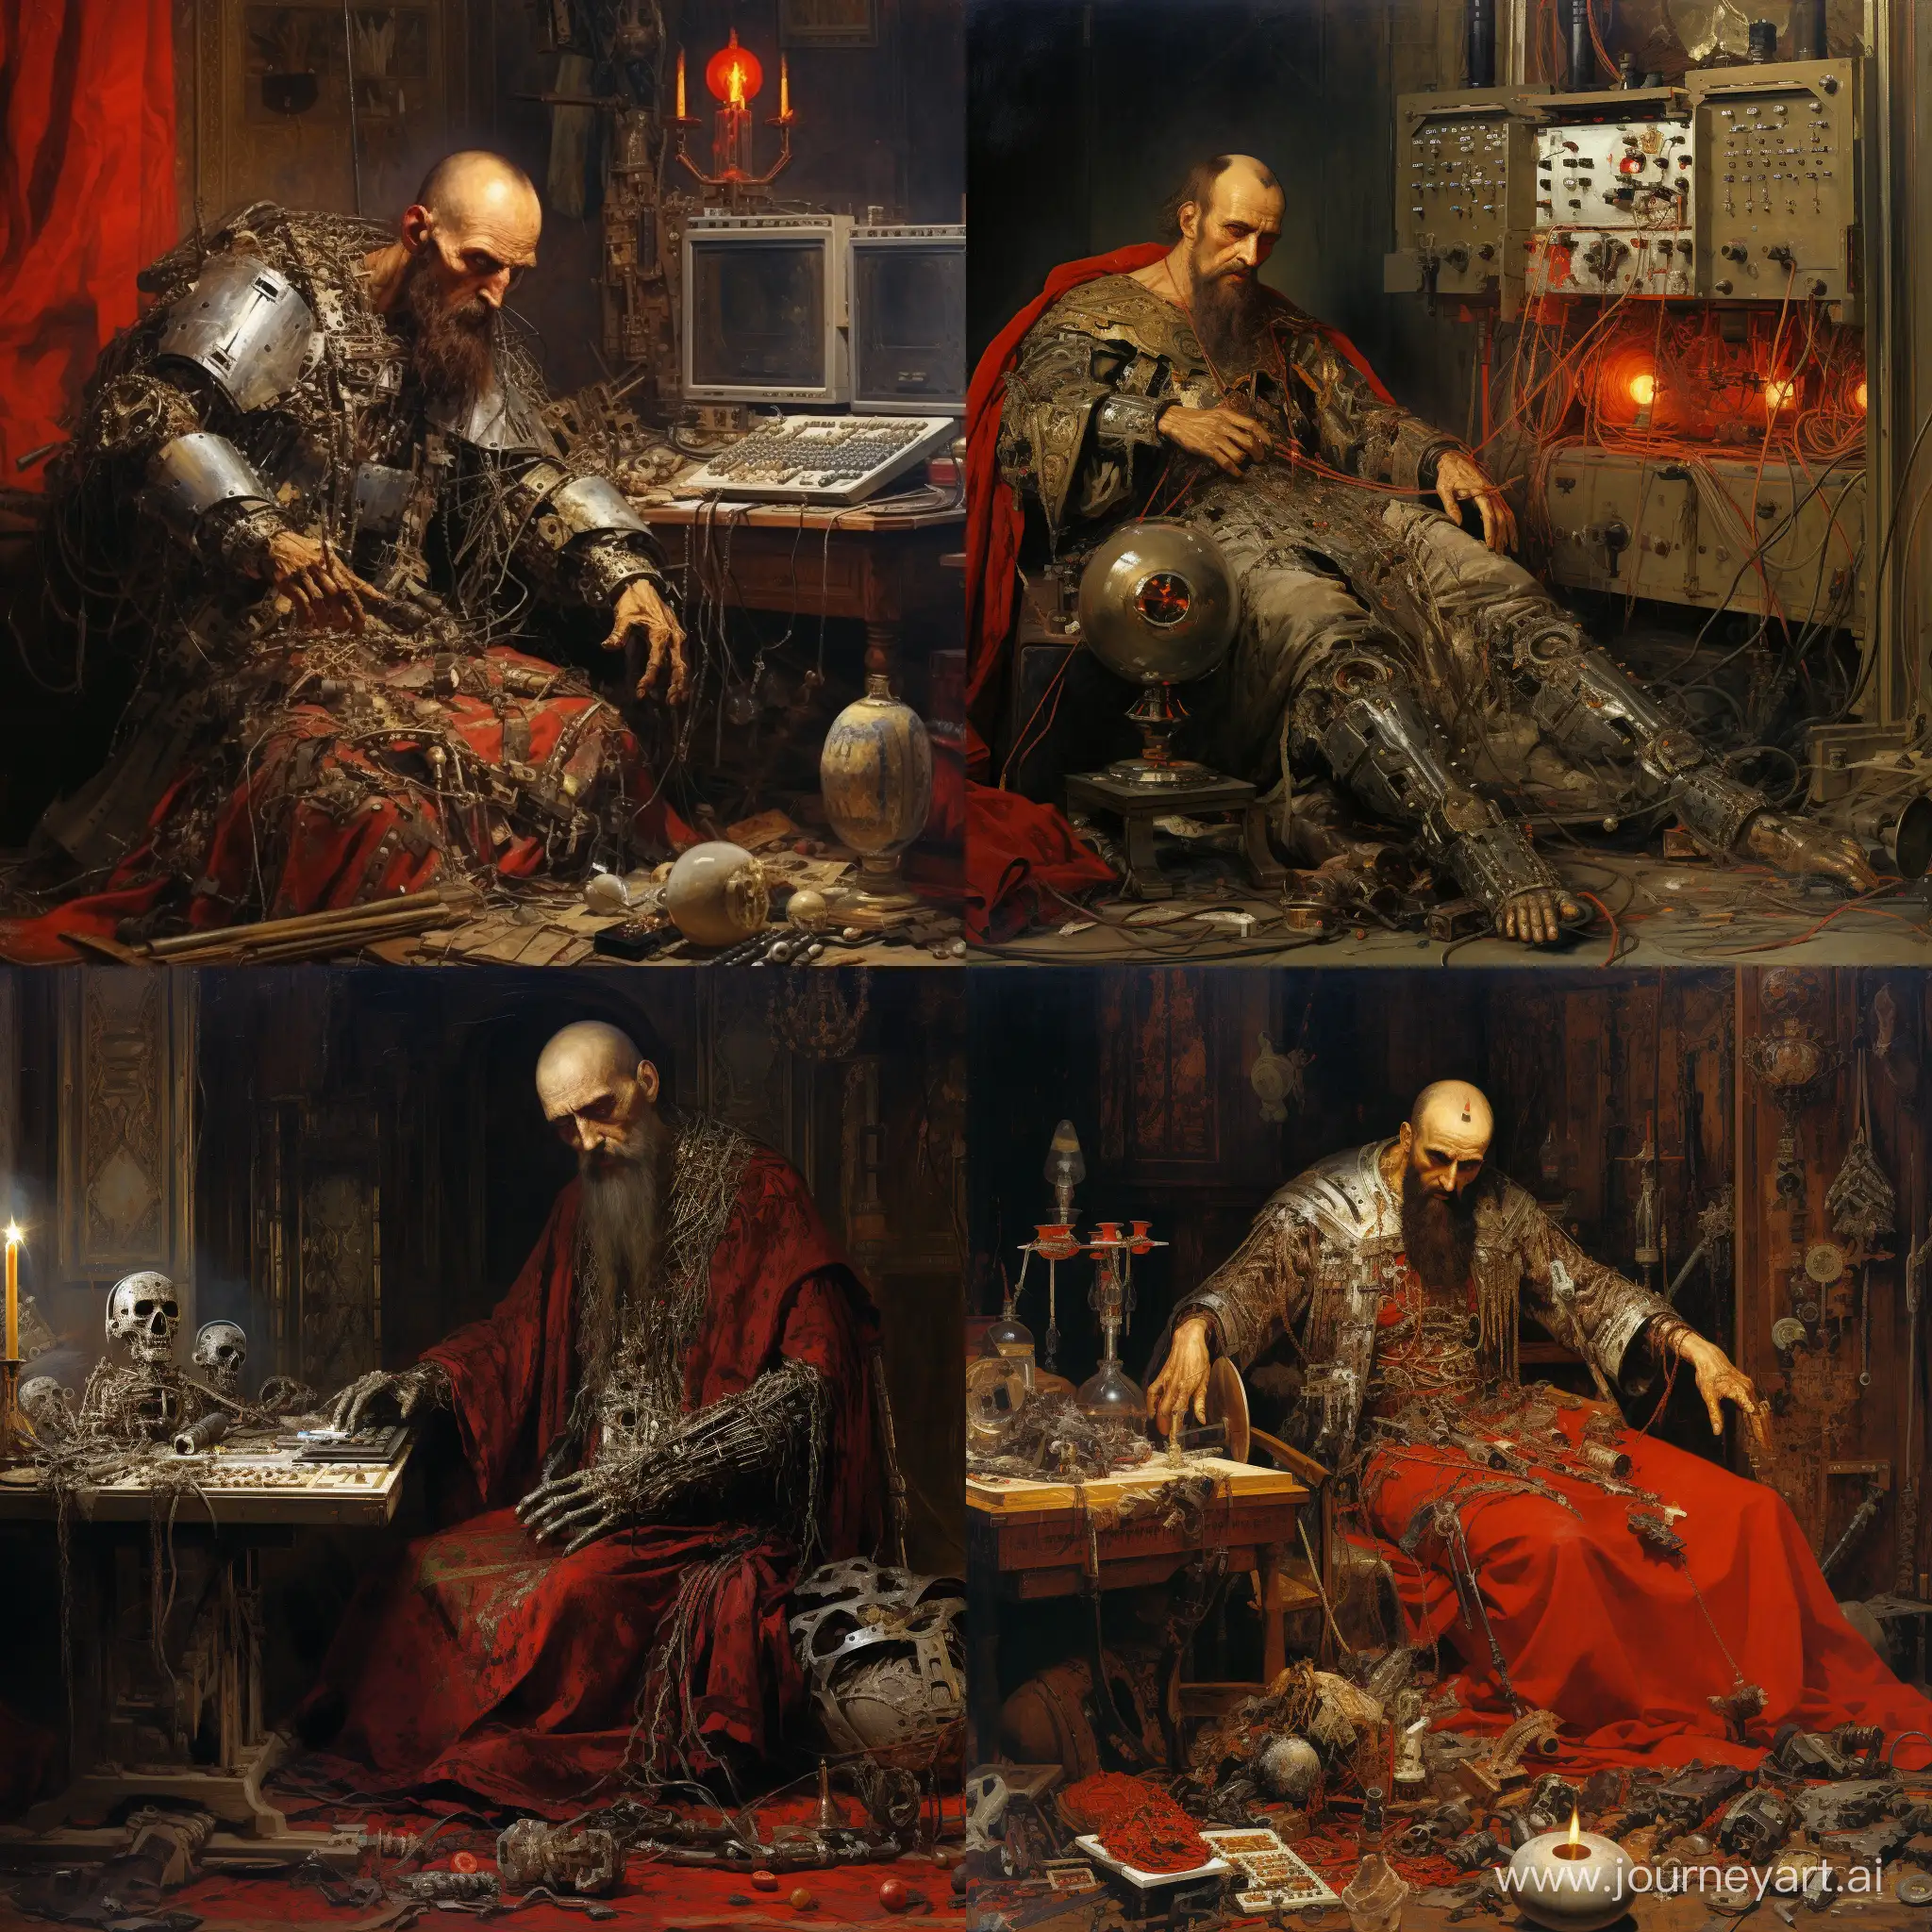 Ivan-the-Terrible-Cybernetic-Dismantling-Tsar-Extracting-Microchips-and-Wires